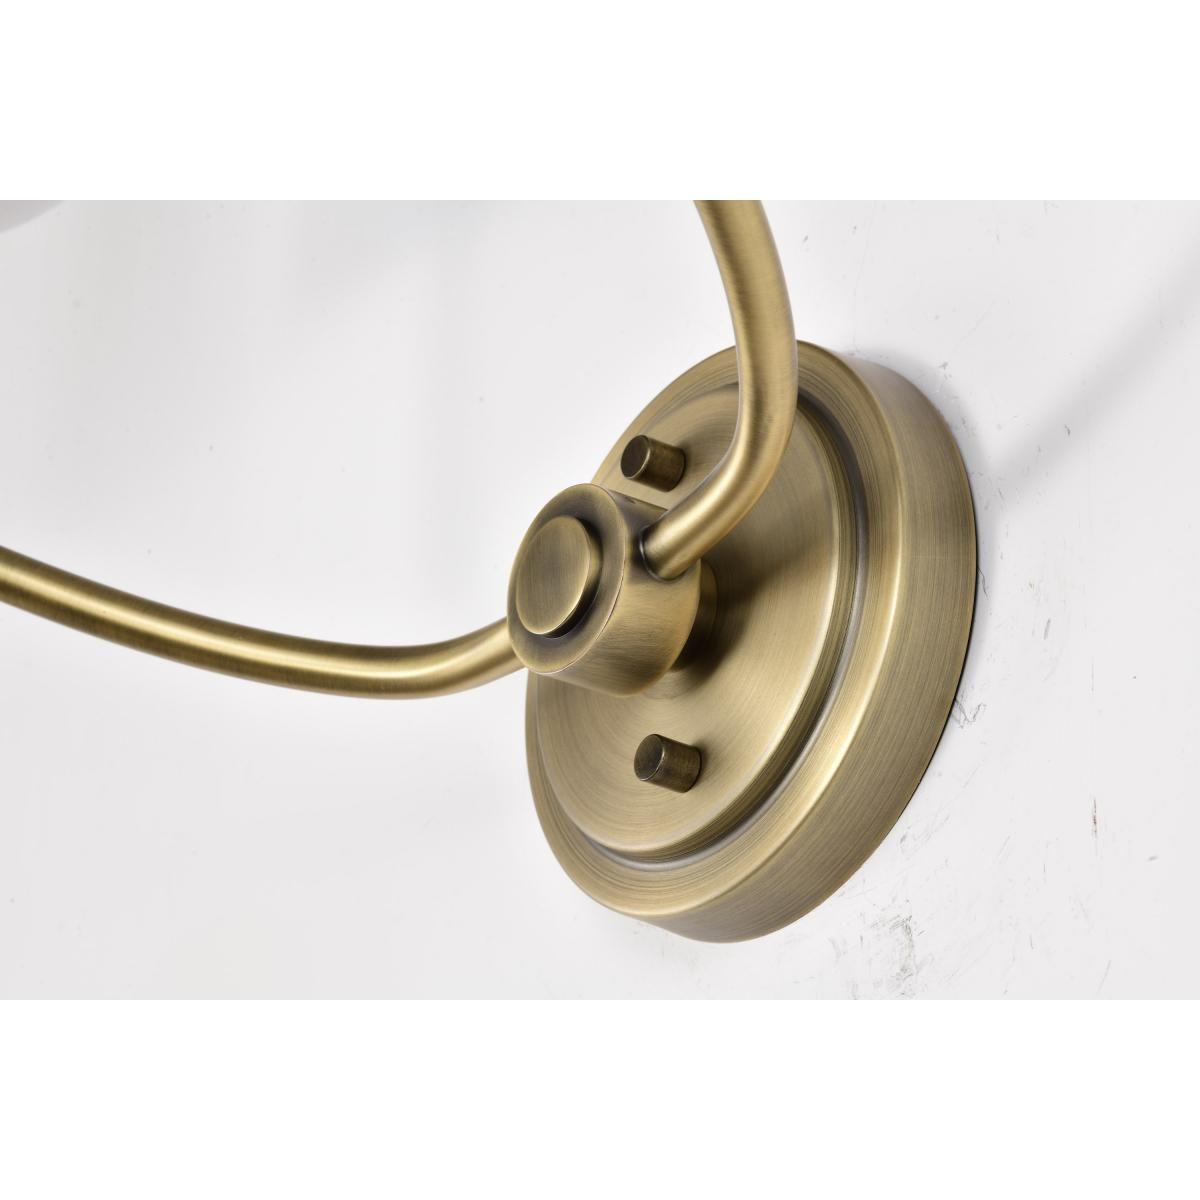 Cordello 16 in. 2 lights Wall Sconce Vintage Brass Finish